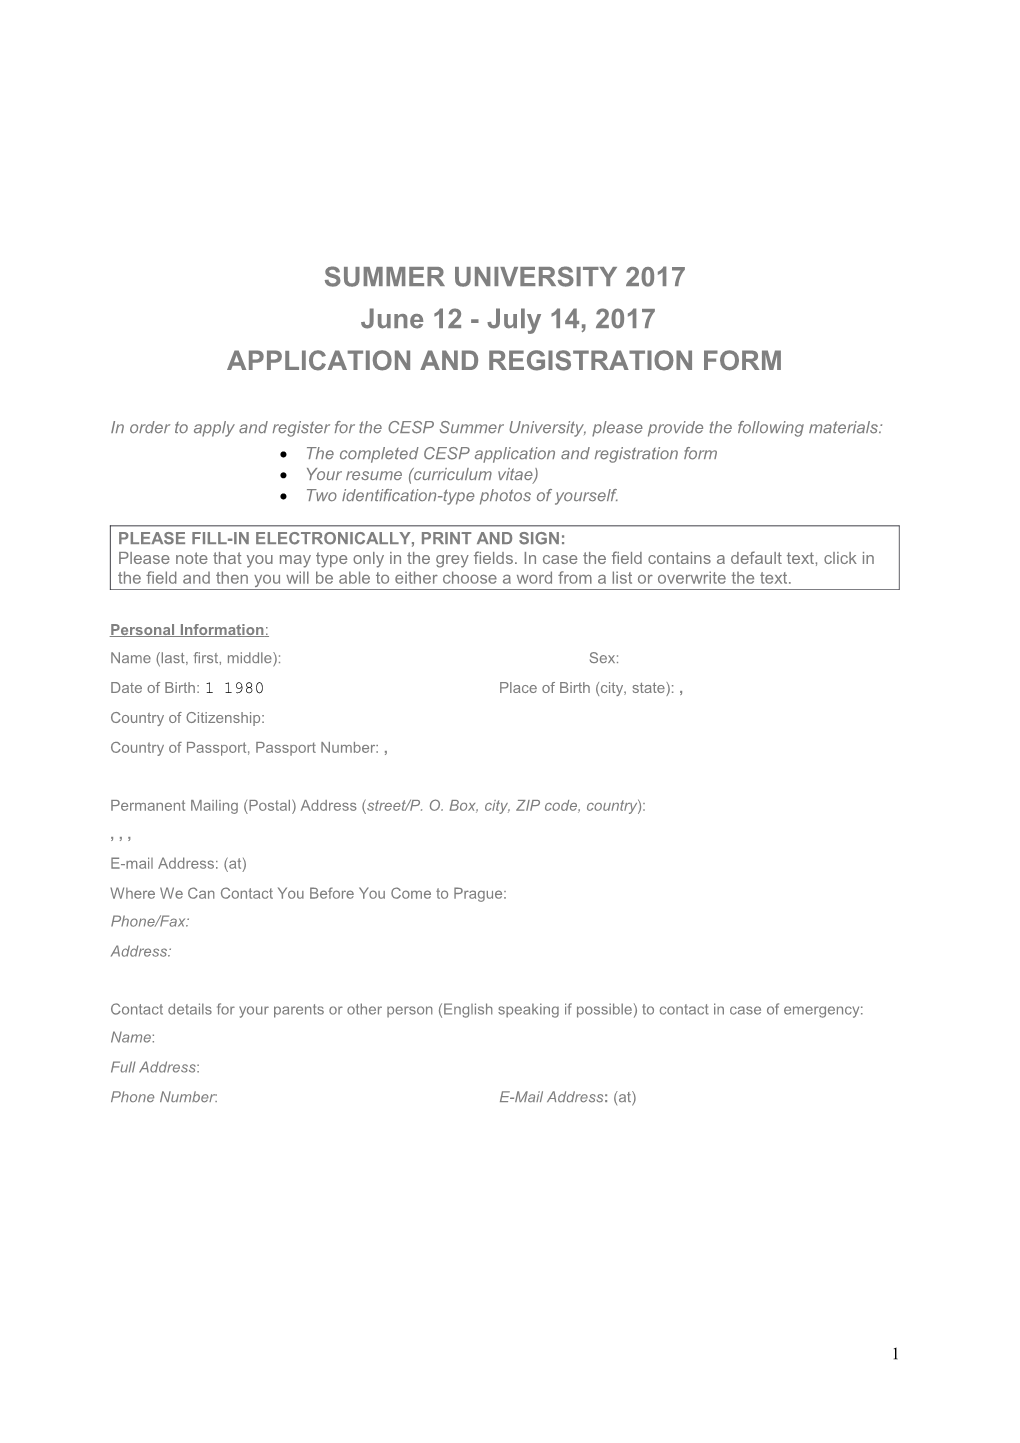 Application and Registration Form s1